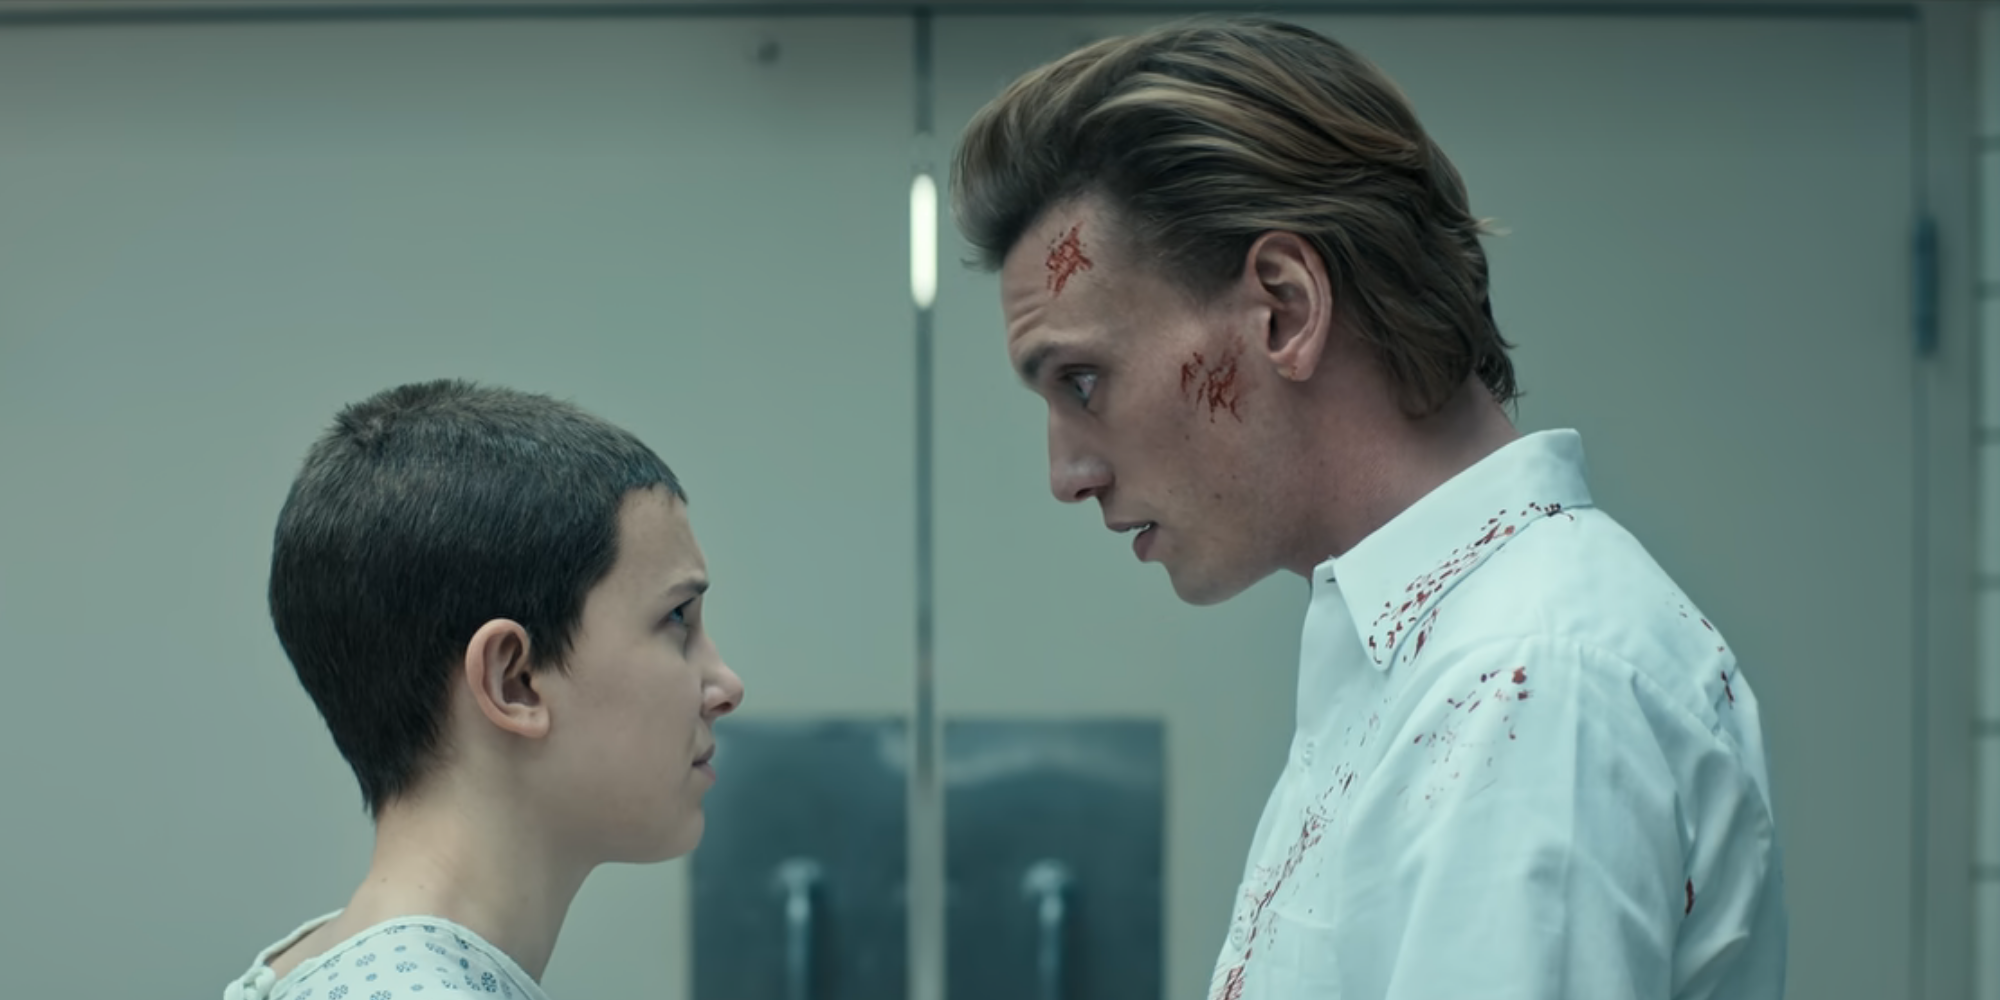 Eleven confronts One in Stranger Things season 4.